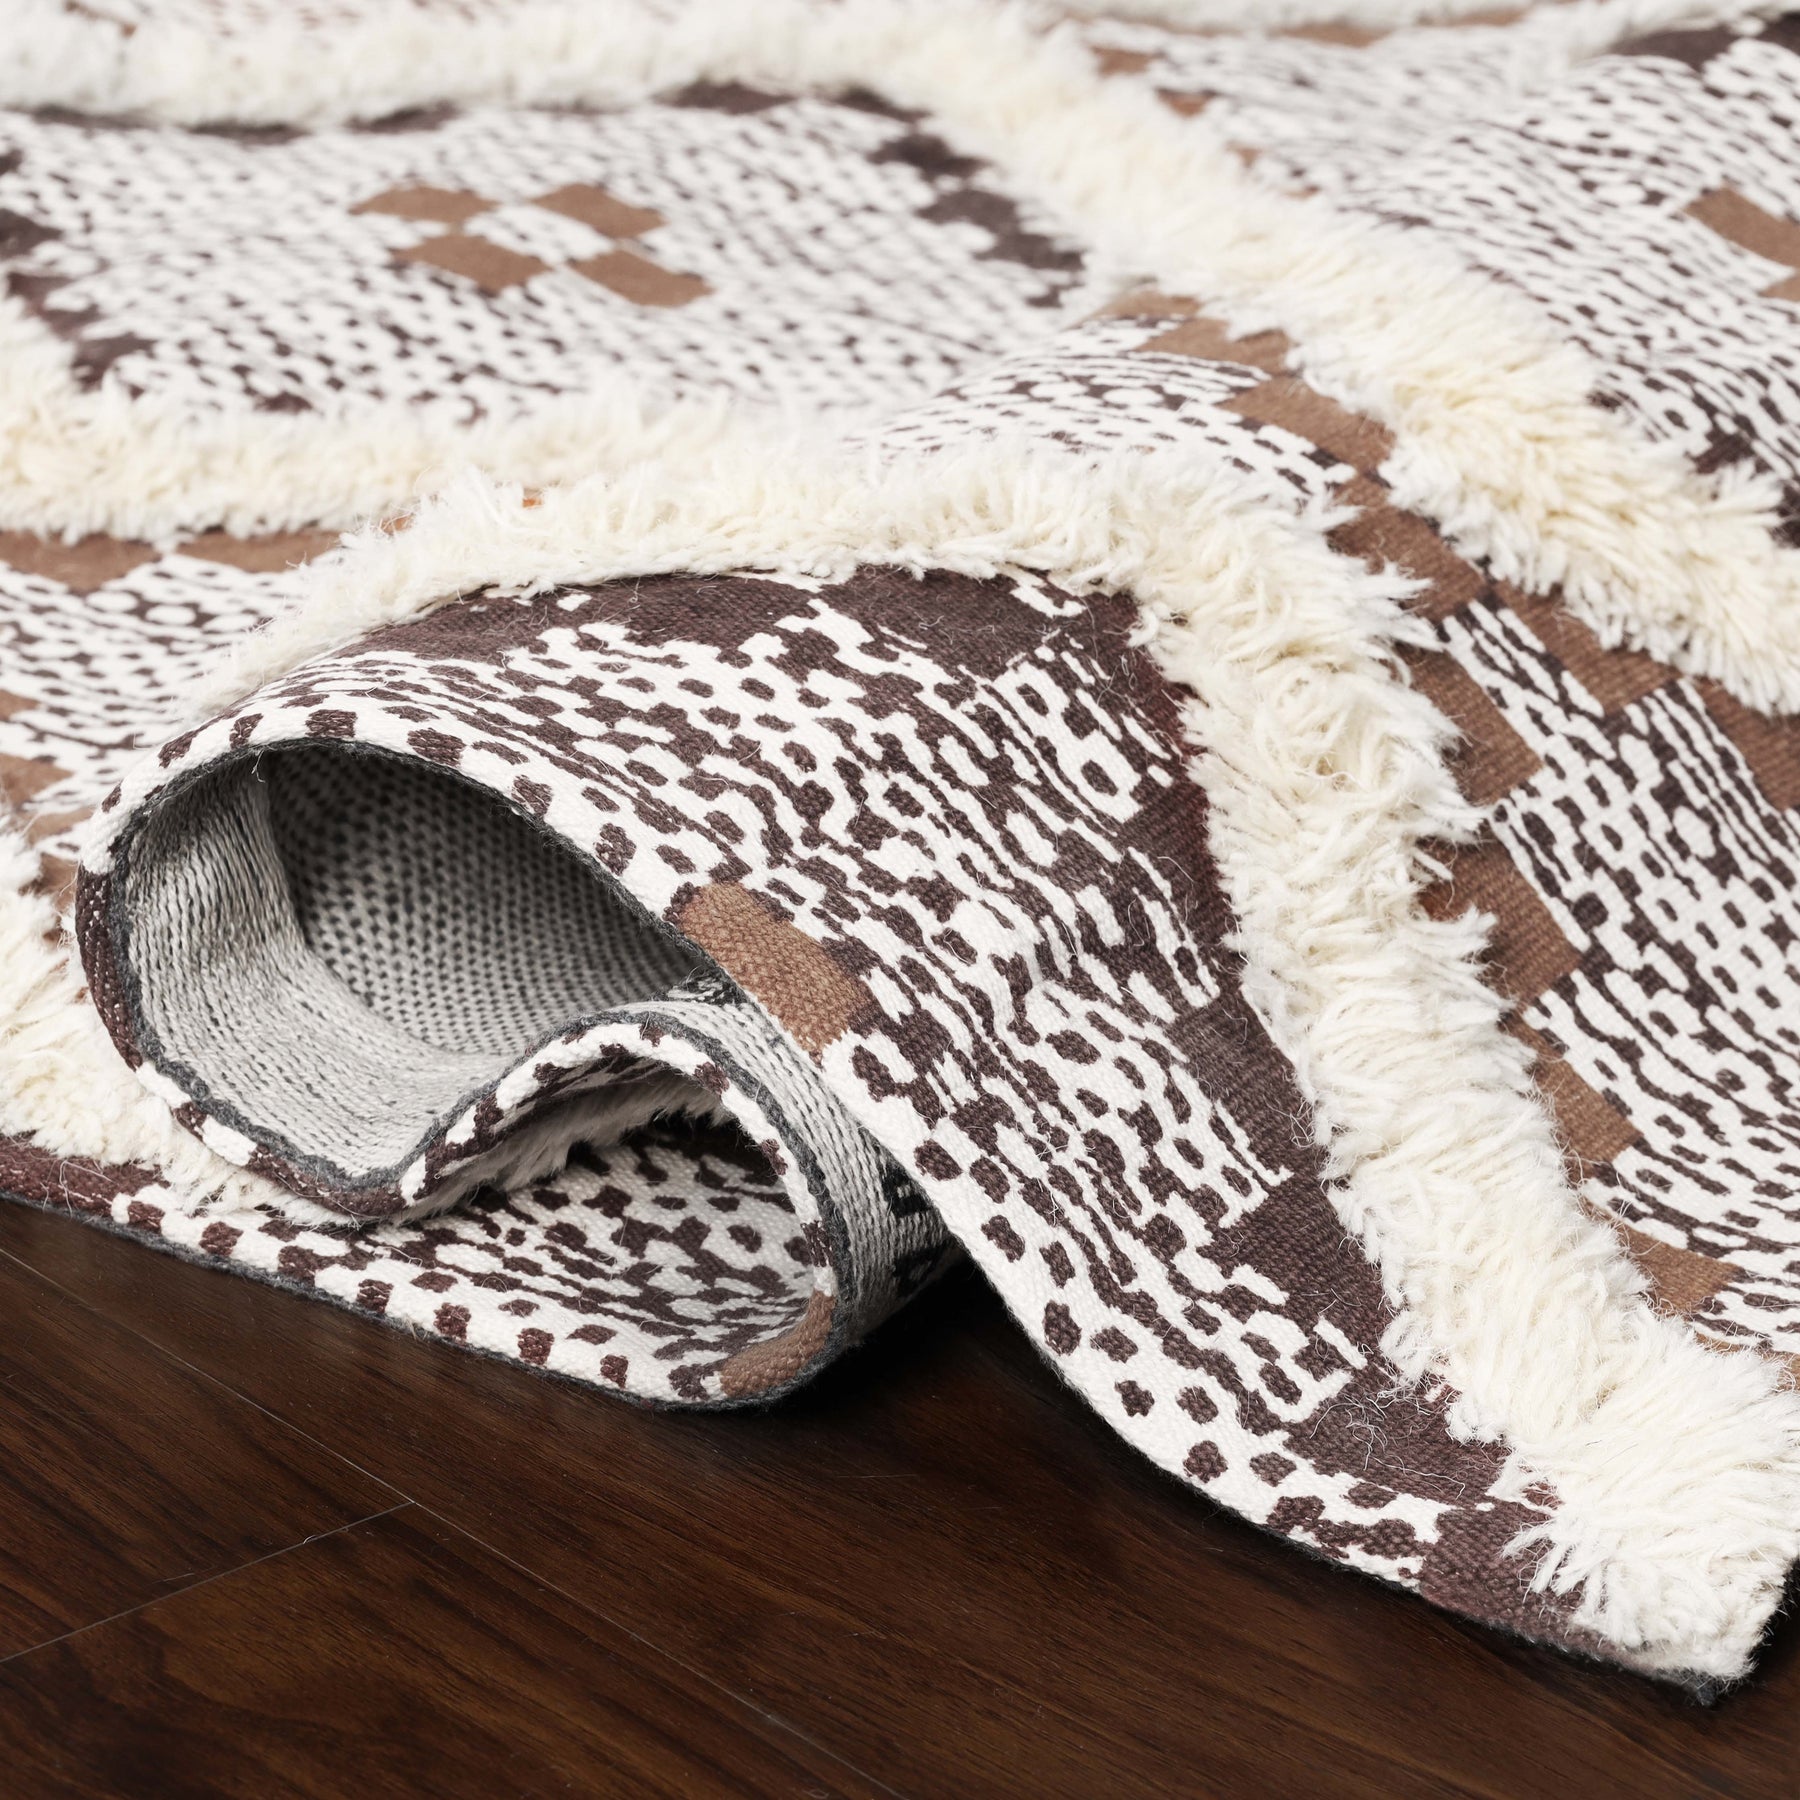 Superior Indoor Area Rug Collection Geometric Design with Cotton-Latex Backing -  Tan-Chocolate